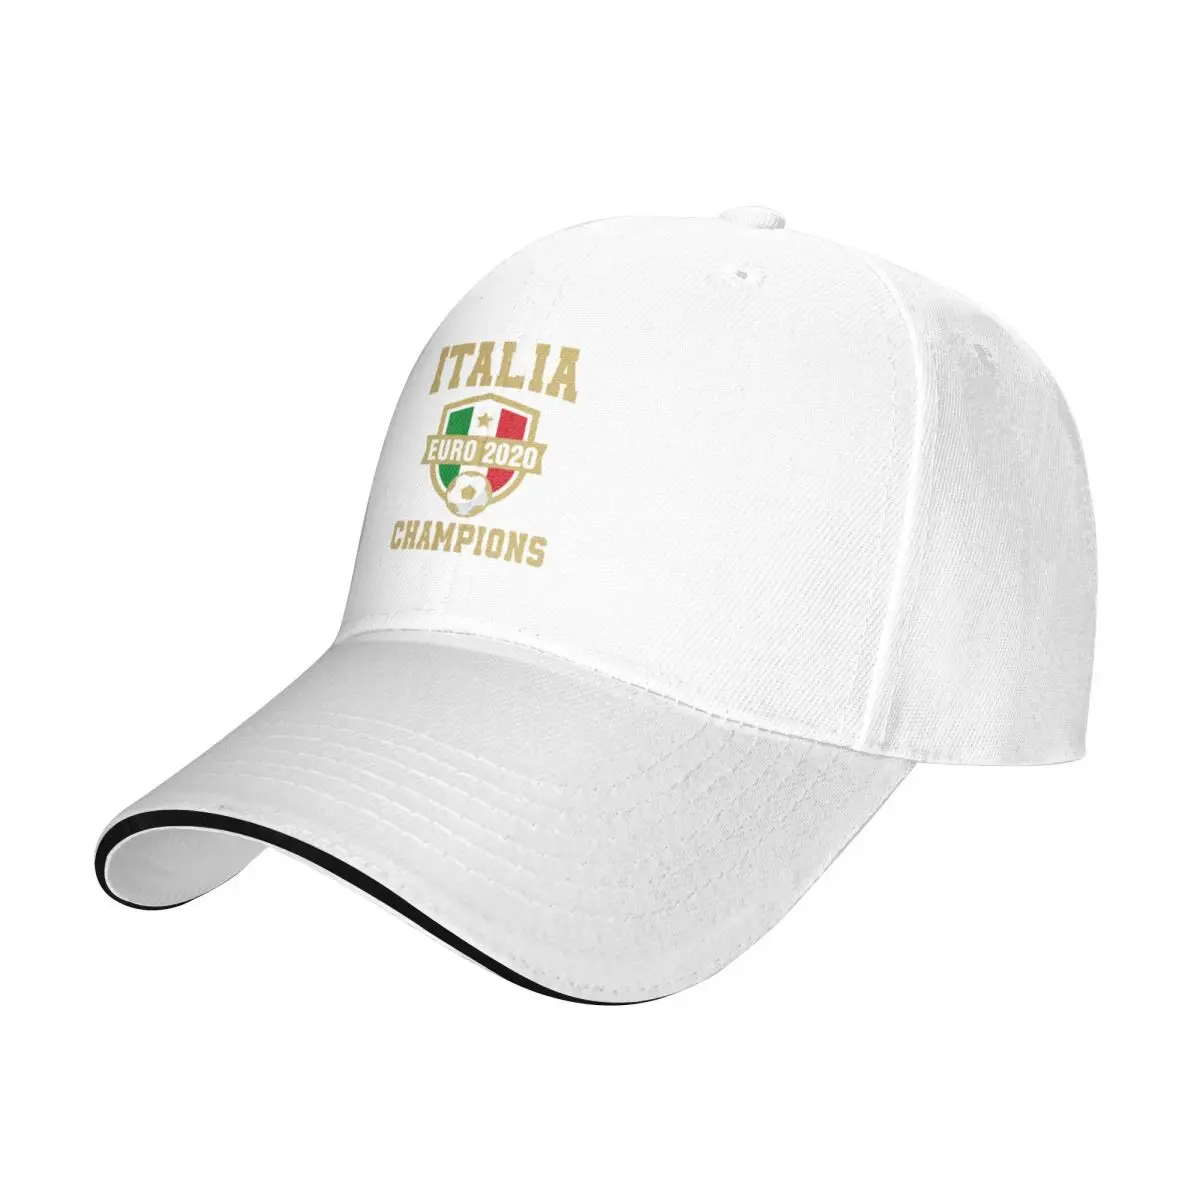 

Italy Euro Champions Baseball Cap Bobble Hat New In Hat Rave Sports Cap Women's Beach Outlet Men's